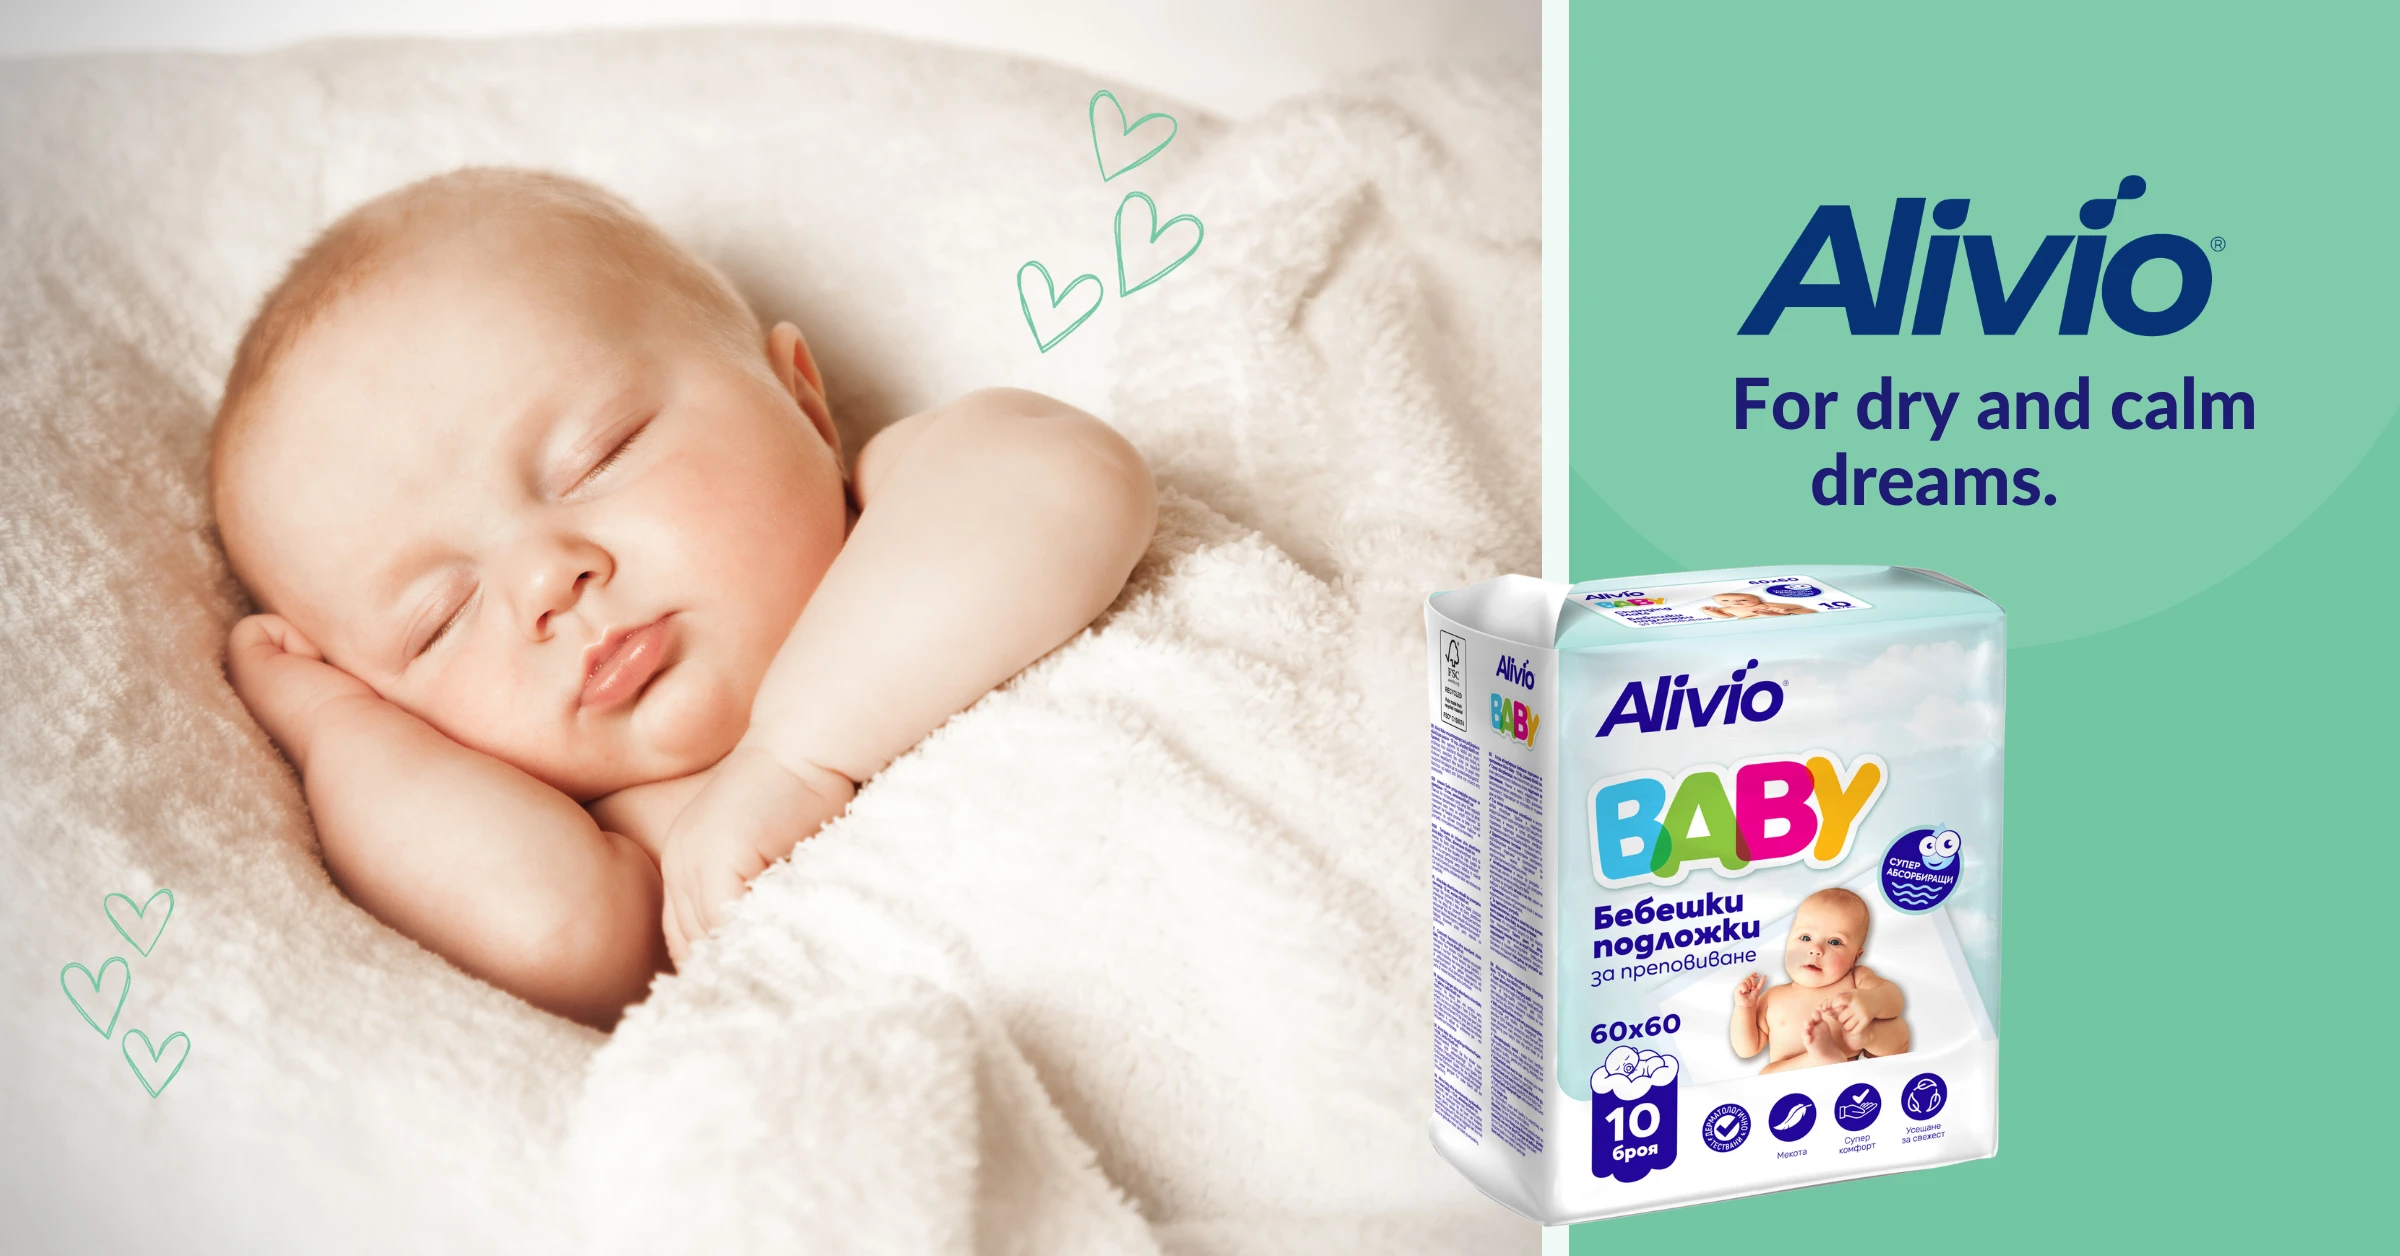 385-alivio-baby-new-eng-16971016210911.png